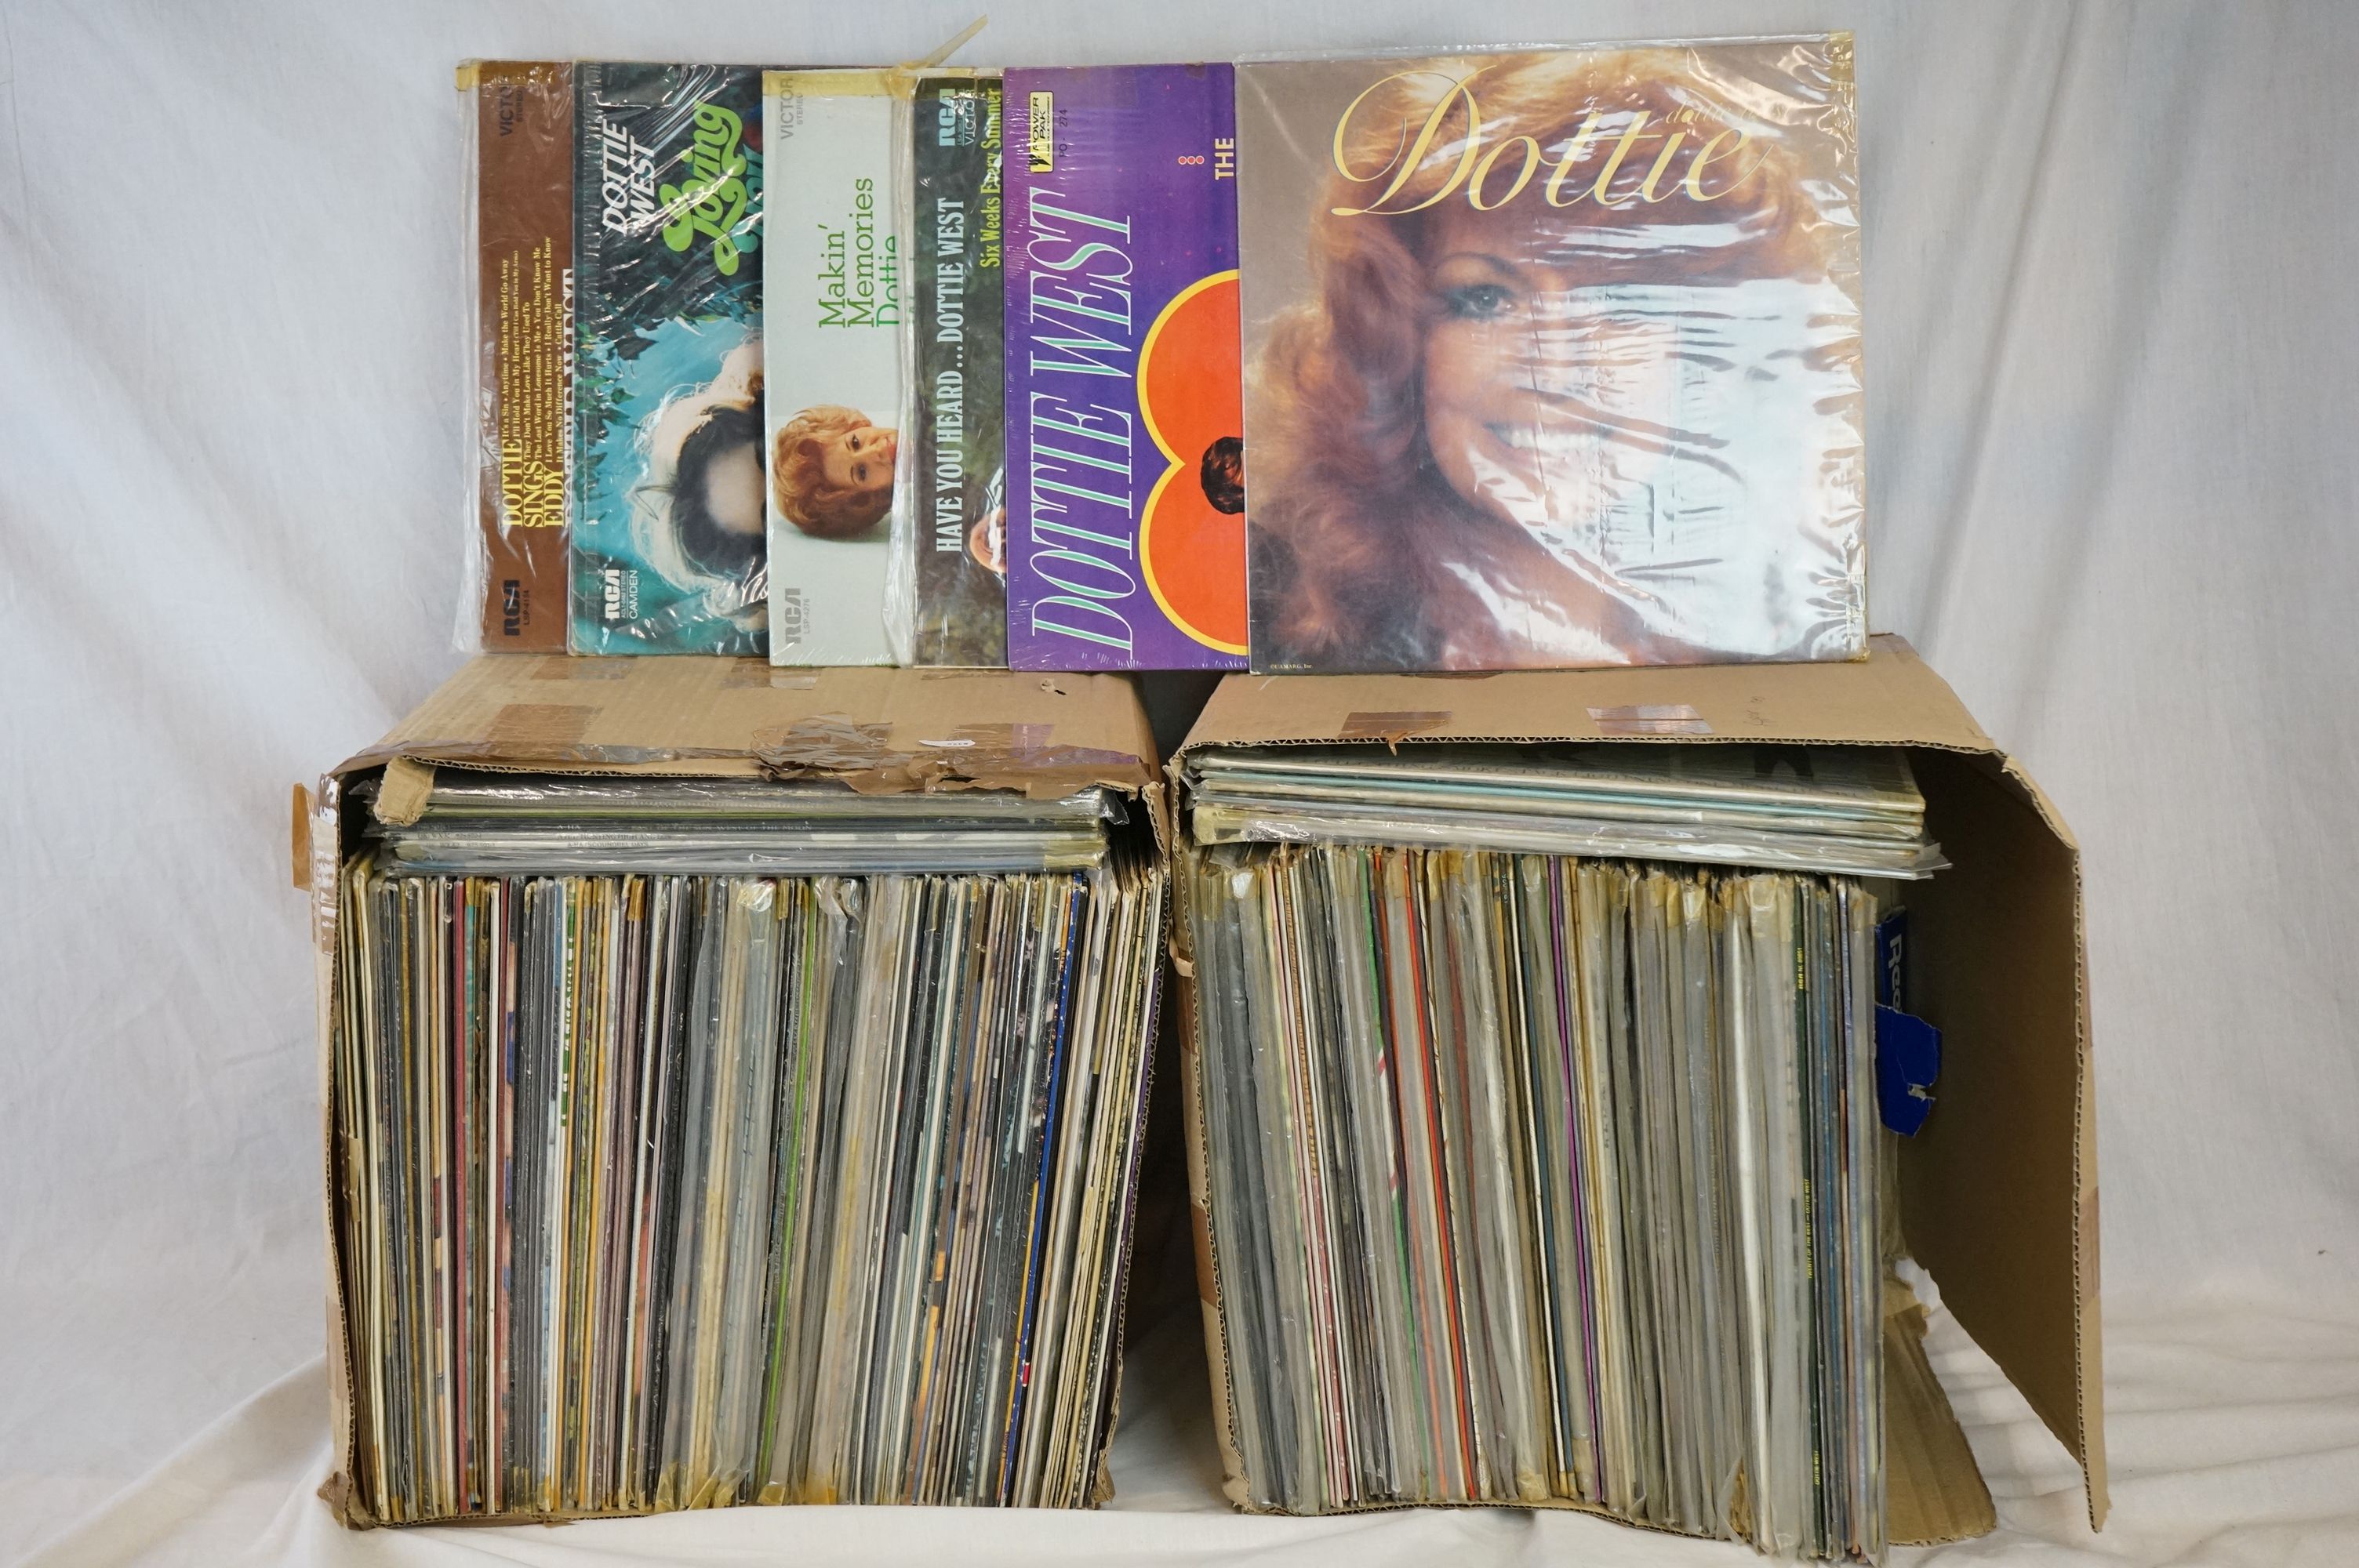 Vinyl - Over 200 LPs featuring various artists and genres to include Country, MOR etc, sleeves and